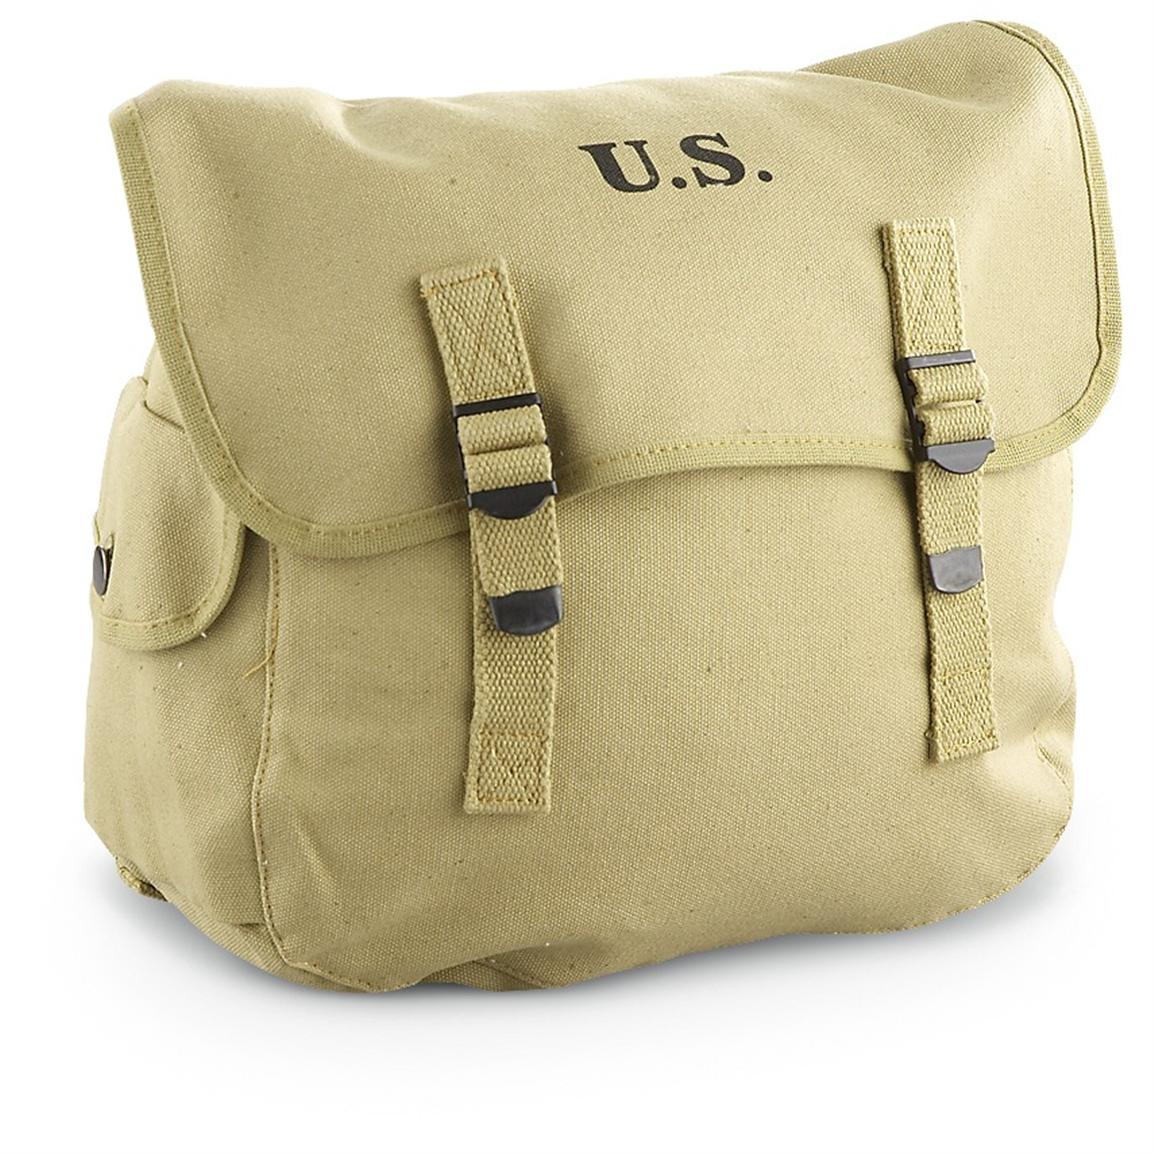 Reproduction WWII U.S. Military Musette Bag, Khaki - 183015, Military Field Gear at Sportsman&#39;s ...